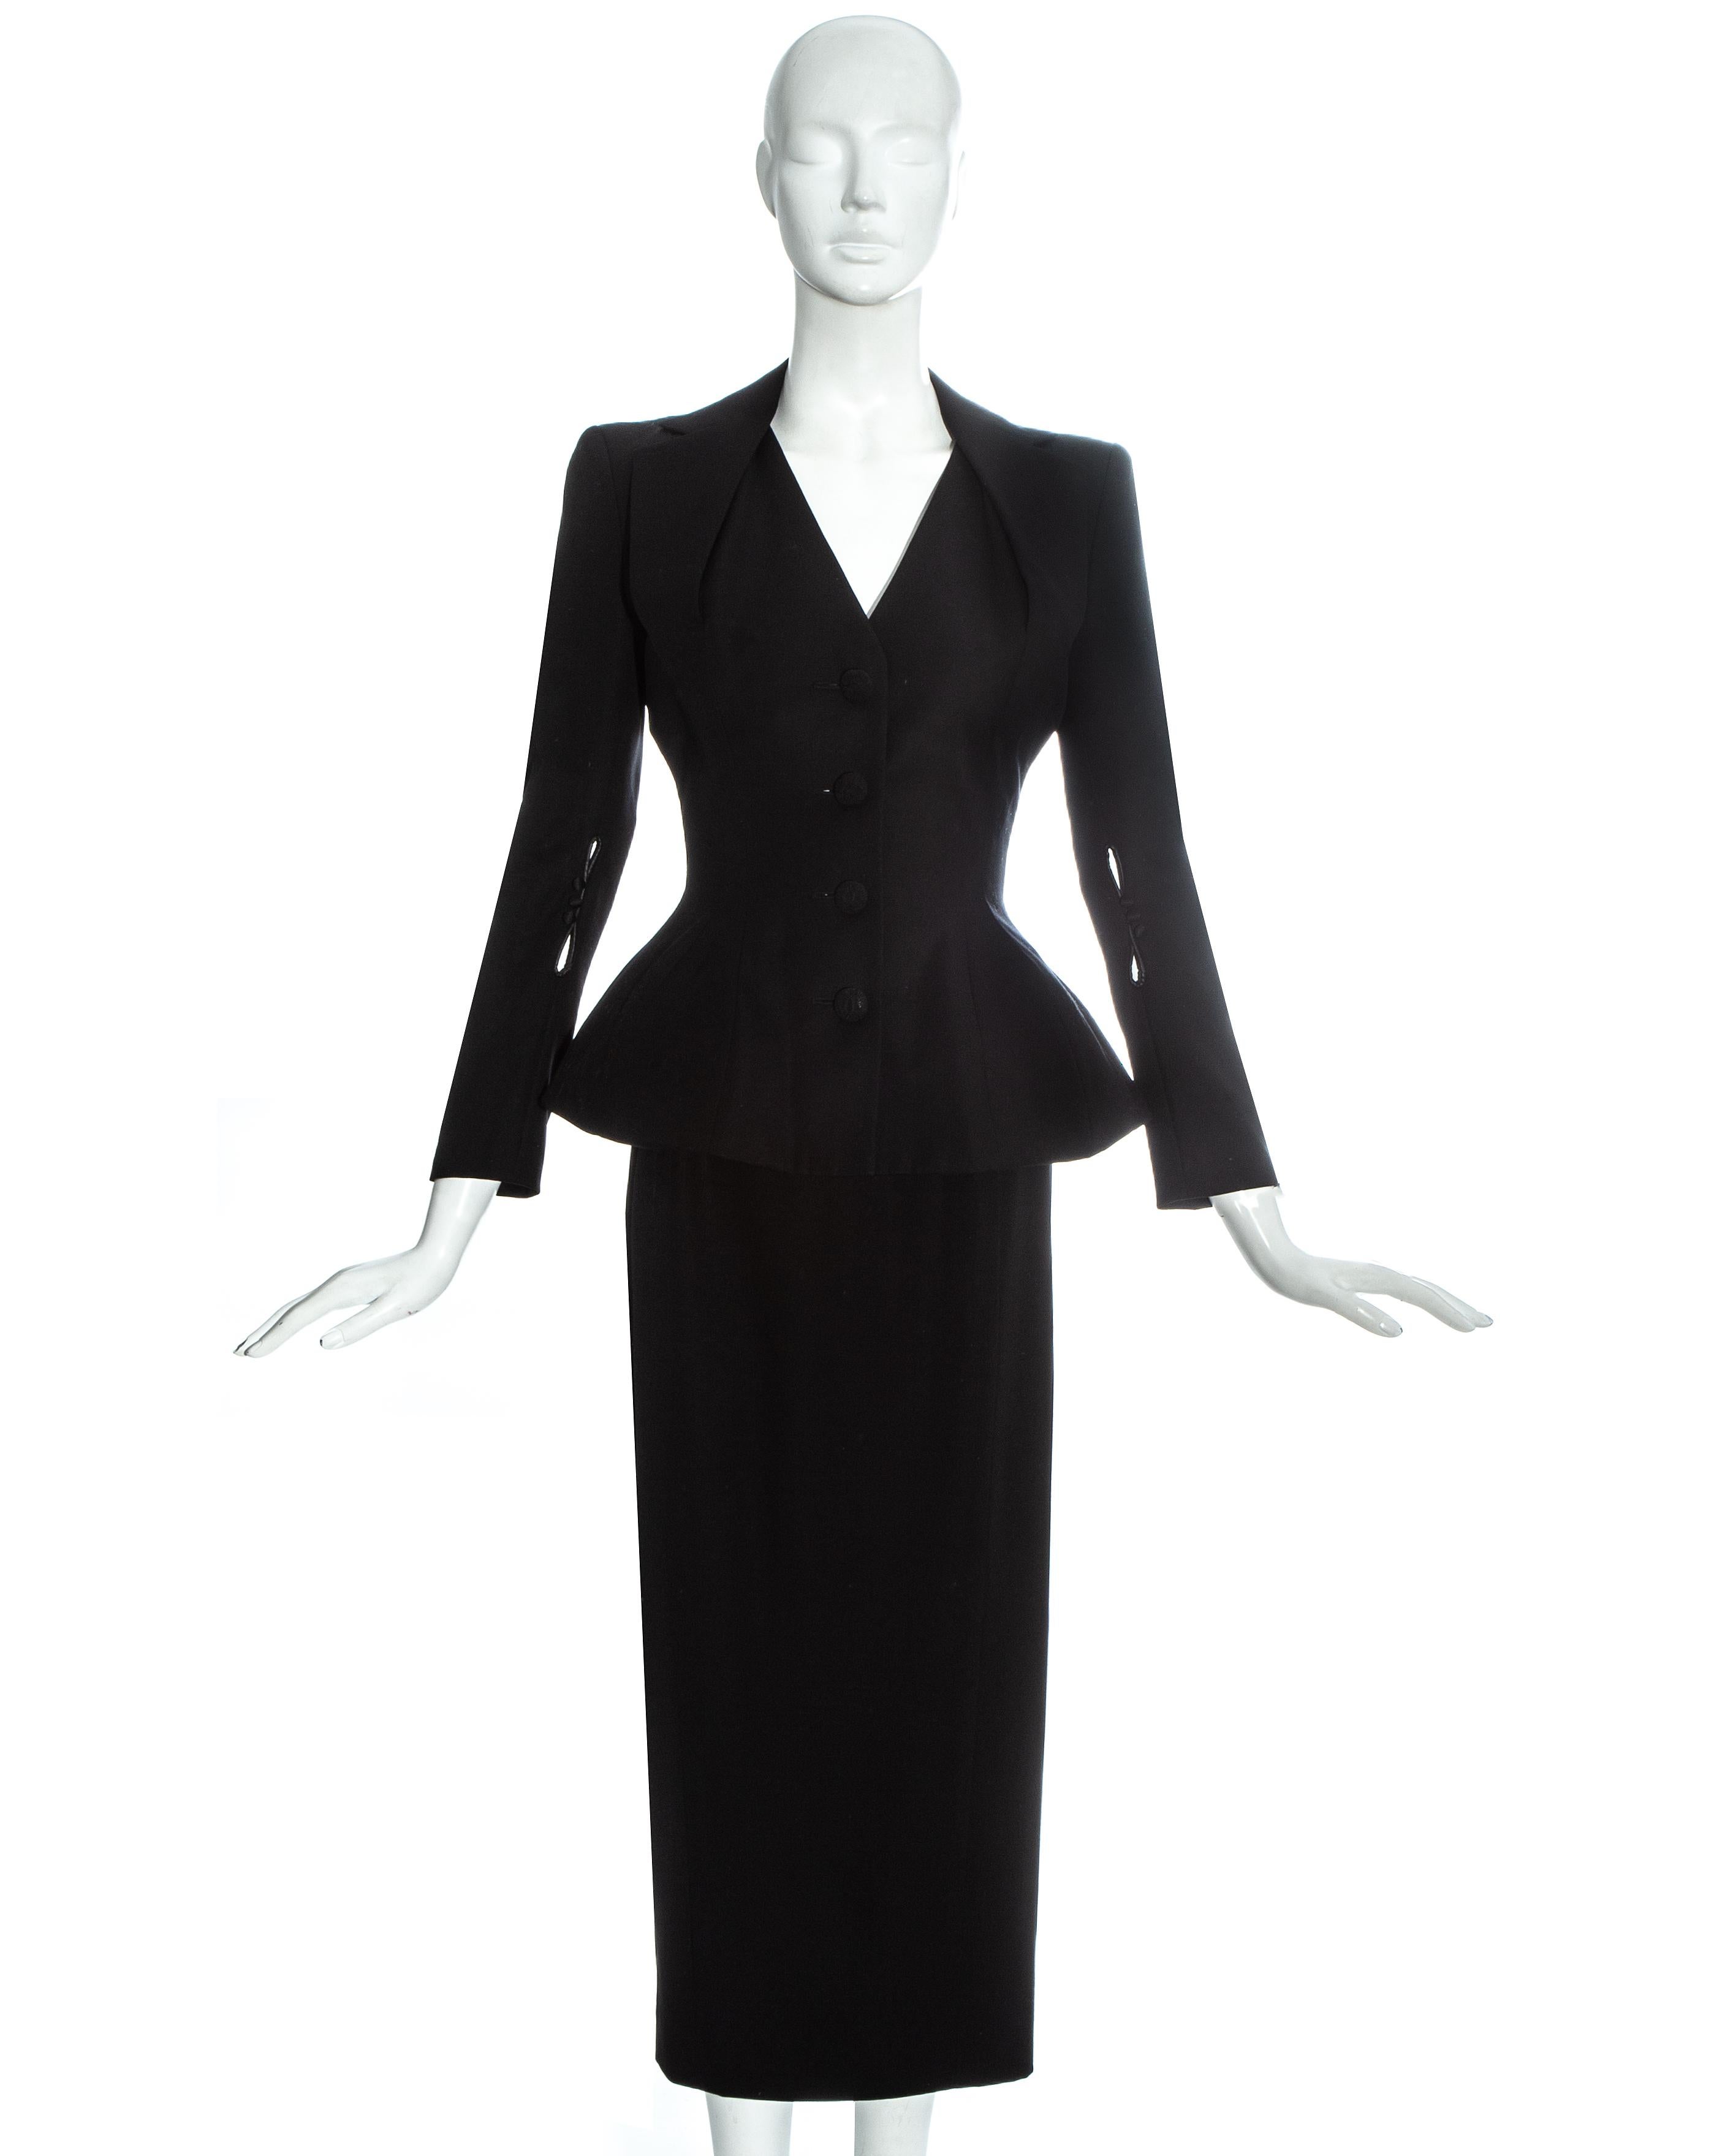 John Galliano black wool 'Pin Up' skirt suit. Jacket with padded shoulders, hips and halter-neck style lapel, cord covered buttons. Matching high-waisted pencil skirt with back slit.   

Misia Diva, Spring-Summer 1995 
